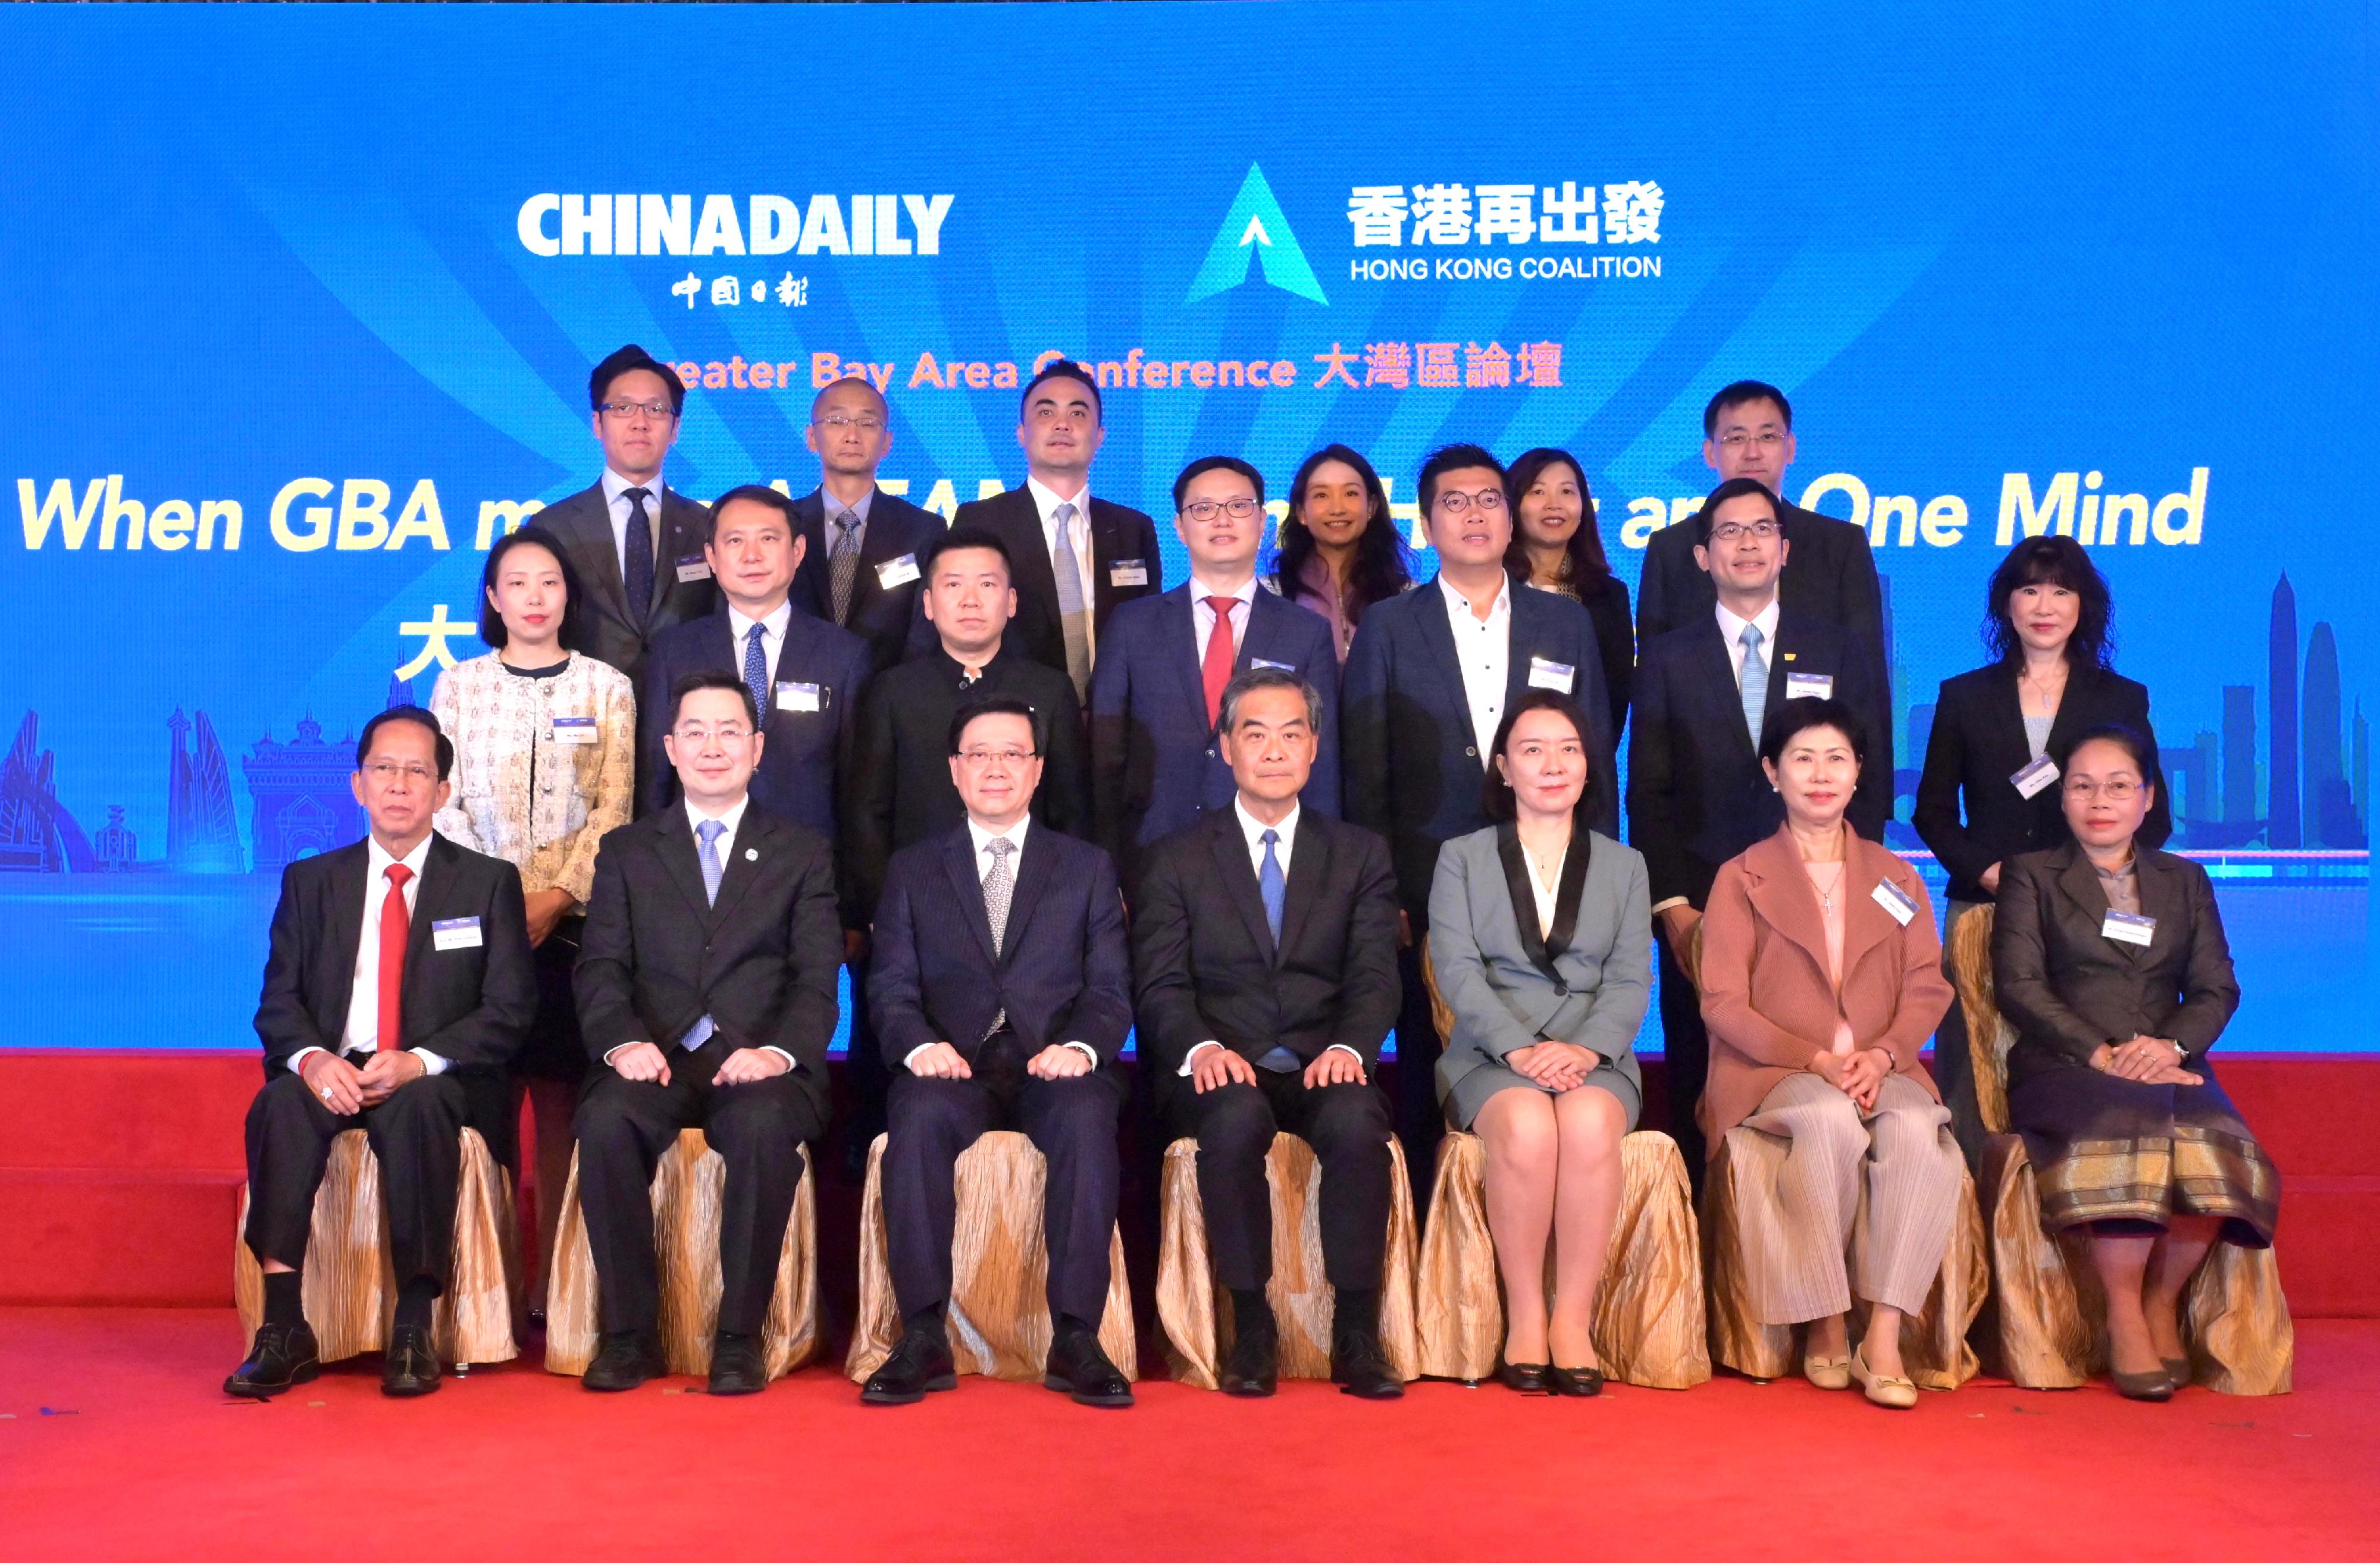 The Chief Executive, Mr John Lee, attended the Greater Bay Area Conference today (November 22). Photo shows (first row, from second left) the Publisher and Editor-in-Chief of China Daily, Mr Qu Yingpu; Mr Lee; Vice-Chairman of the National Committee of the Chinese People's Political Consultative Conference Mr C Y Leung; Deputy Director of the Liaison Office of the Central People's Government in the Hong Kong Special Administrative Region Ms Lu Xinning; Deputy Secretary-General of the Hong Kong Coalition Dr Jane Lee, and other guests with the speakers of the conference.
